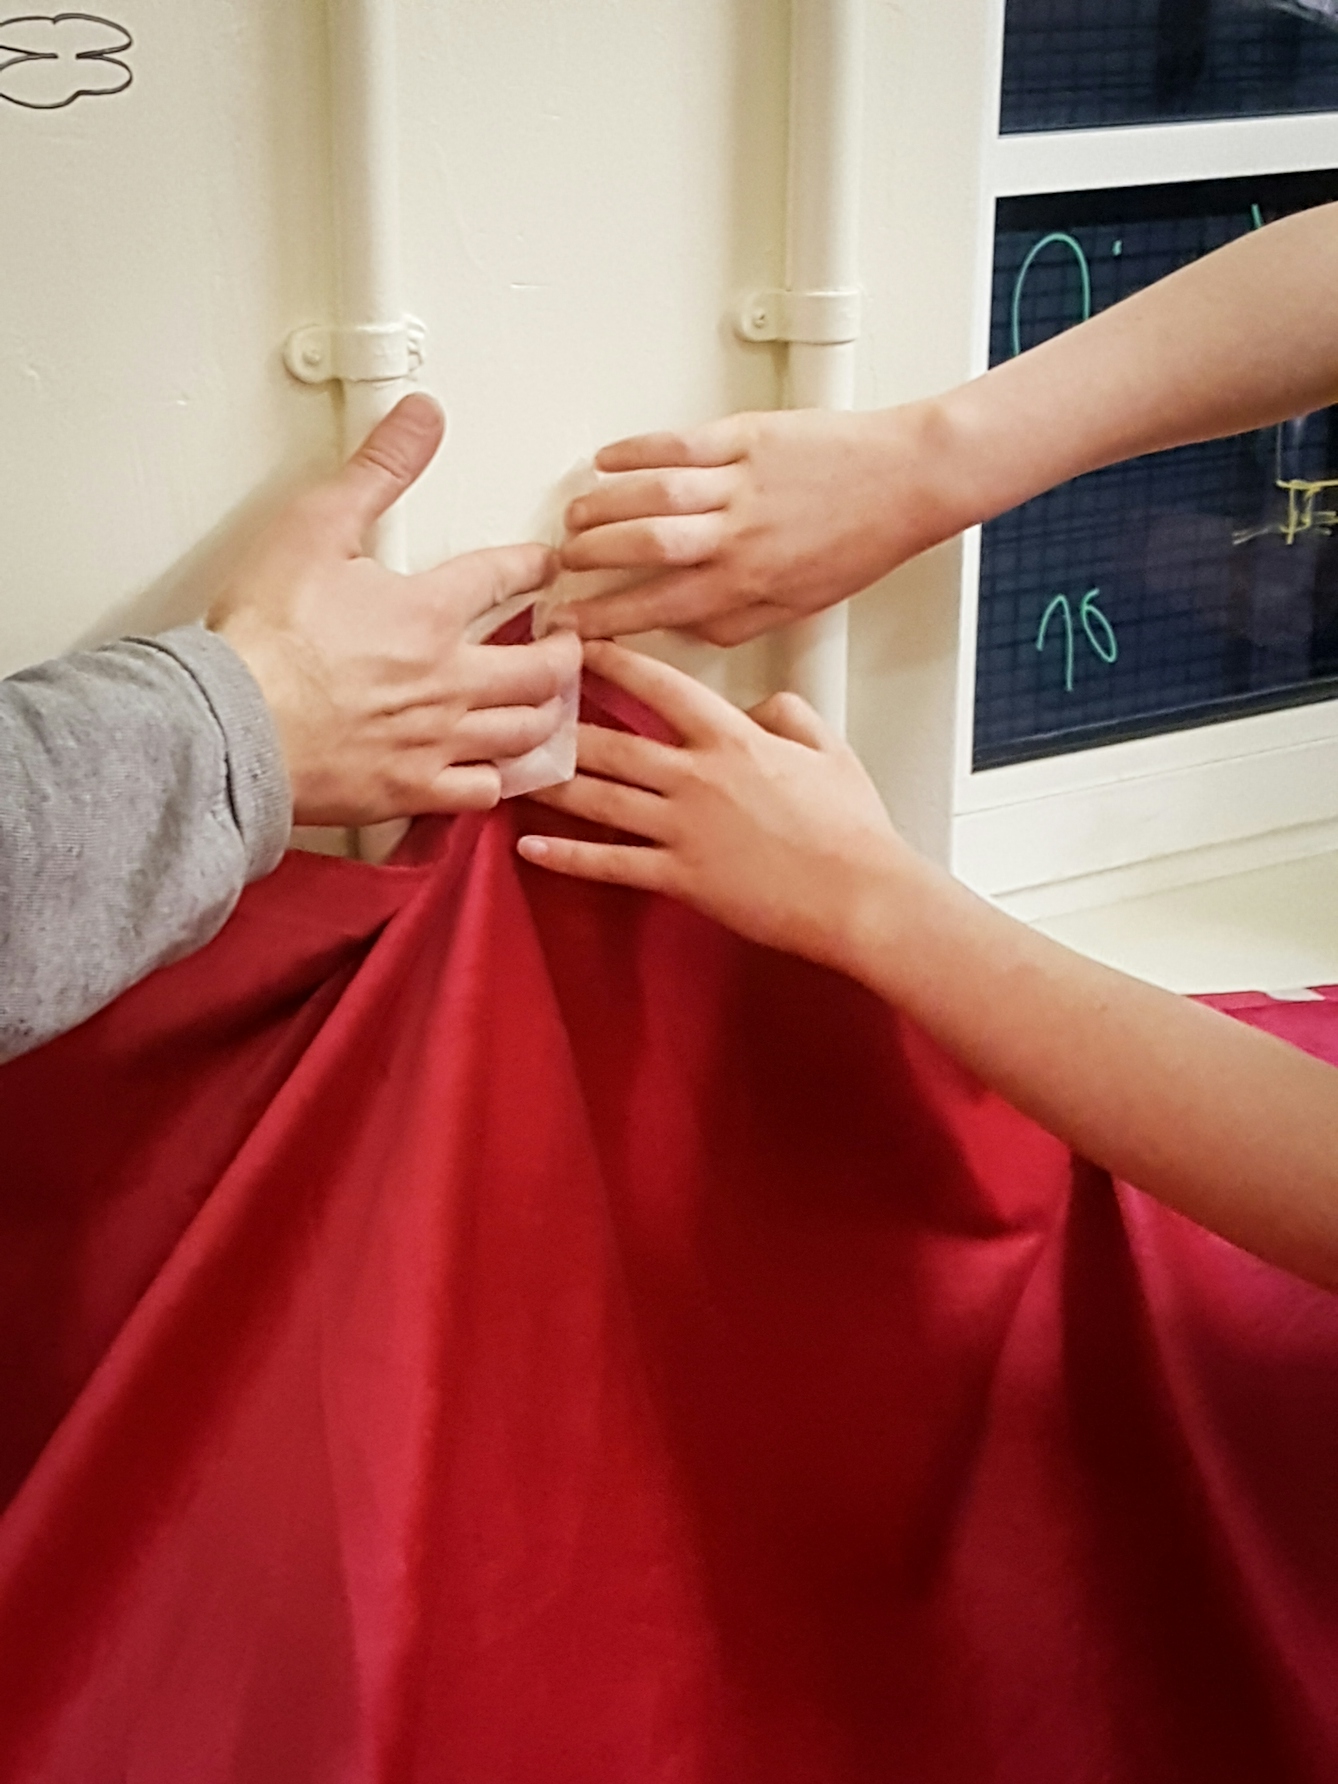 A photograph in portrait orientation showing a close up of a large piece of red fabric being held up against a magnolia painted wall by three hands, one of which belongs to a young person, the others a child. Parallel to one another are two pipes painted magnolia running up the wall, and in the top right of the image the bottom corner of a blacked out window can be seen. 